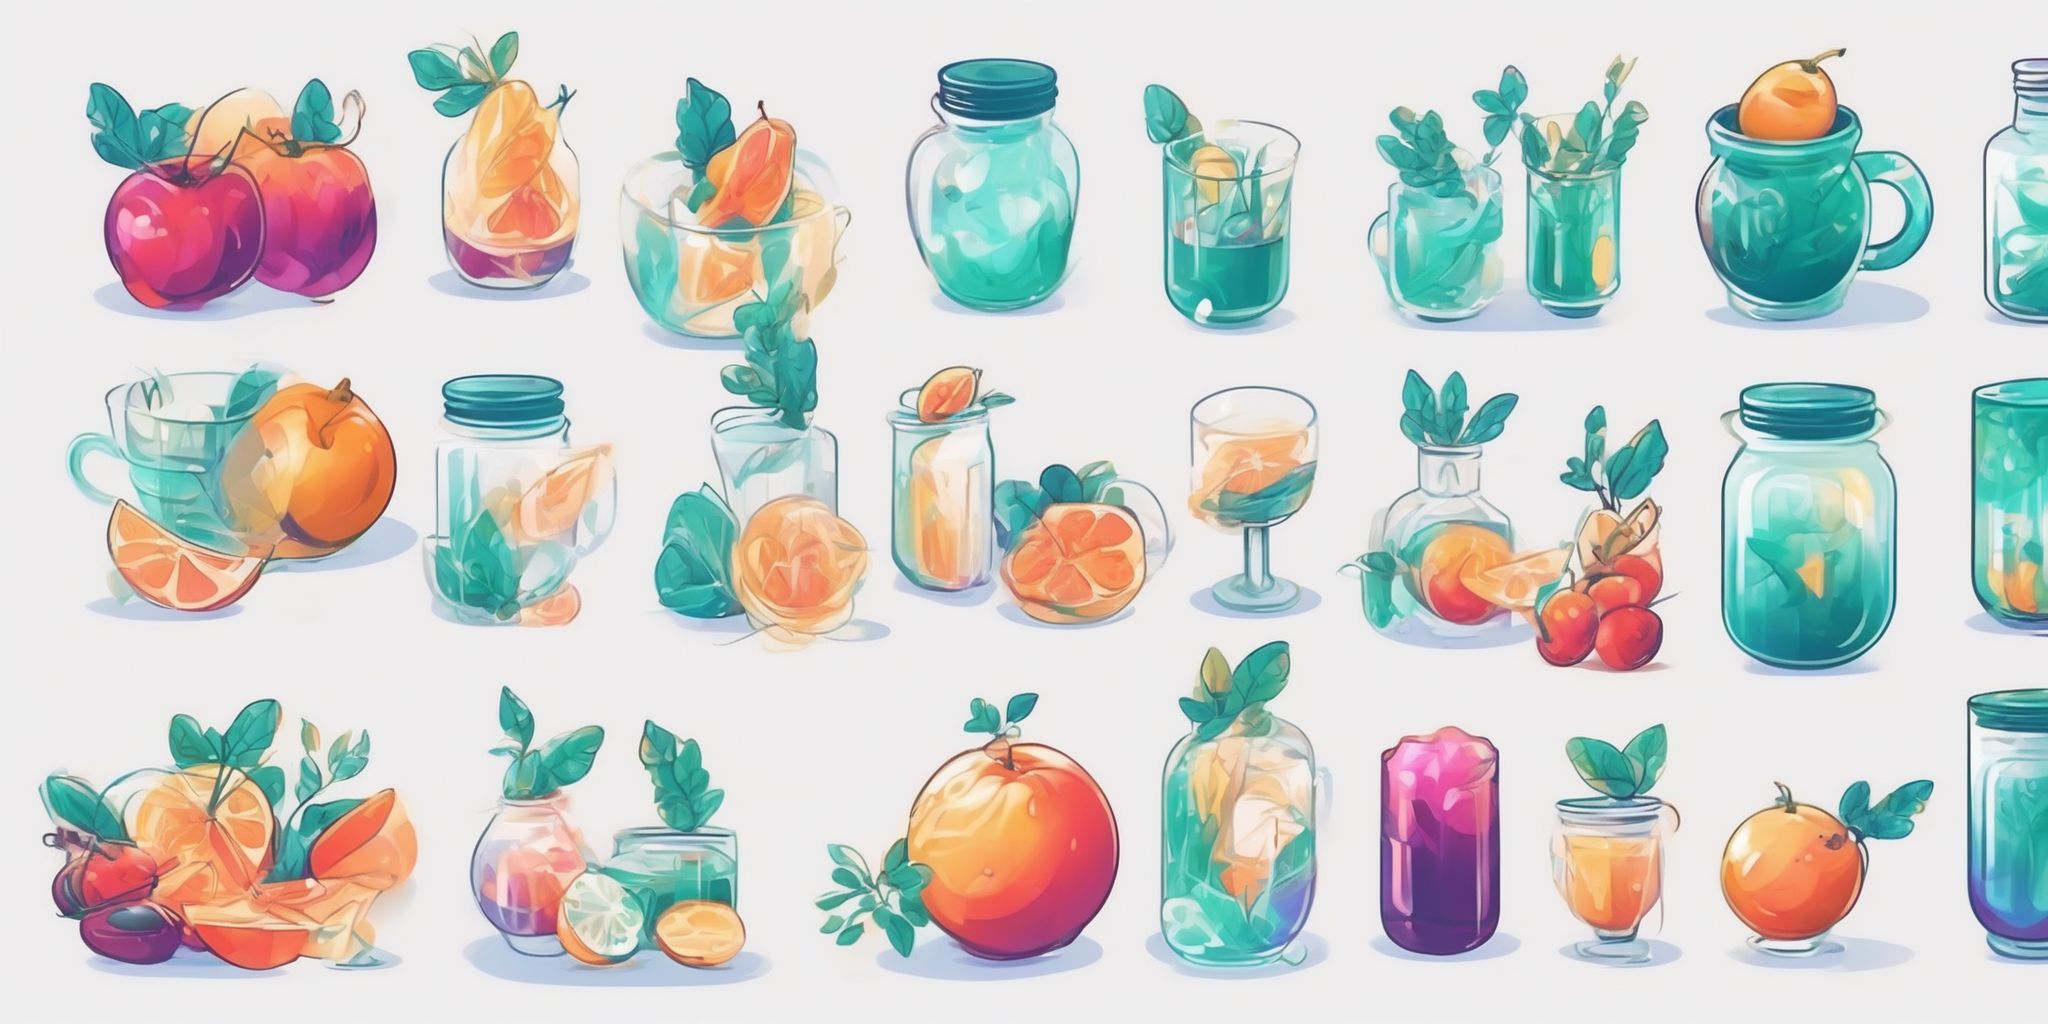 tips in illustration style with gradients and white background